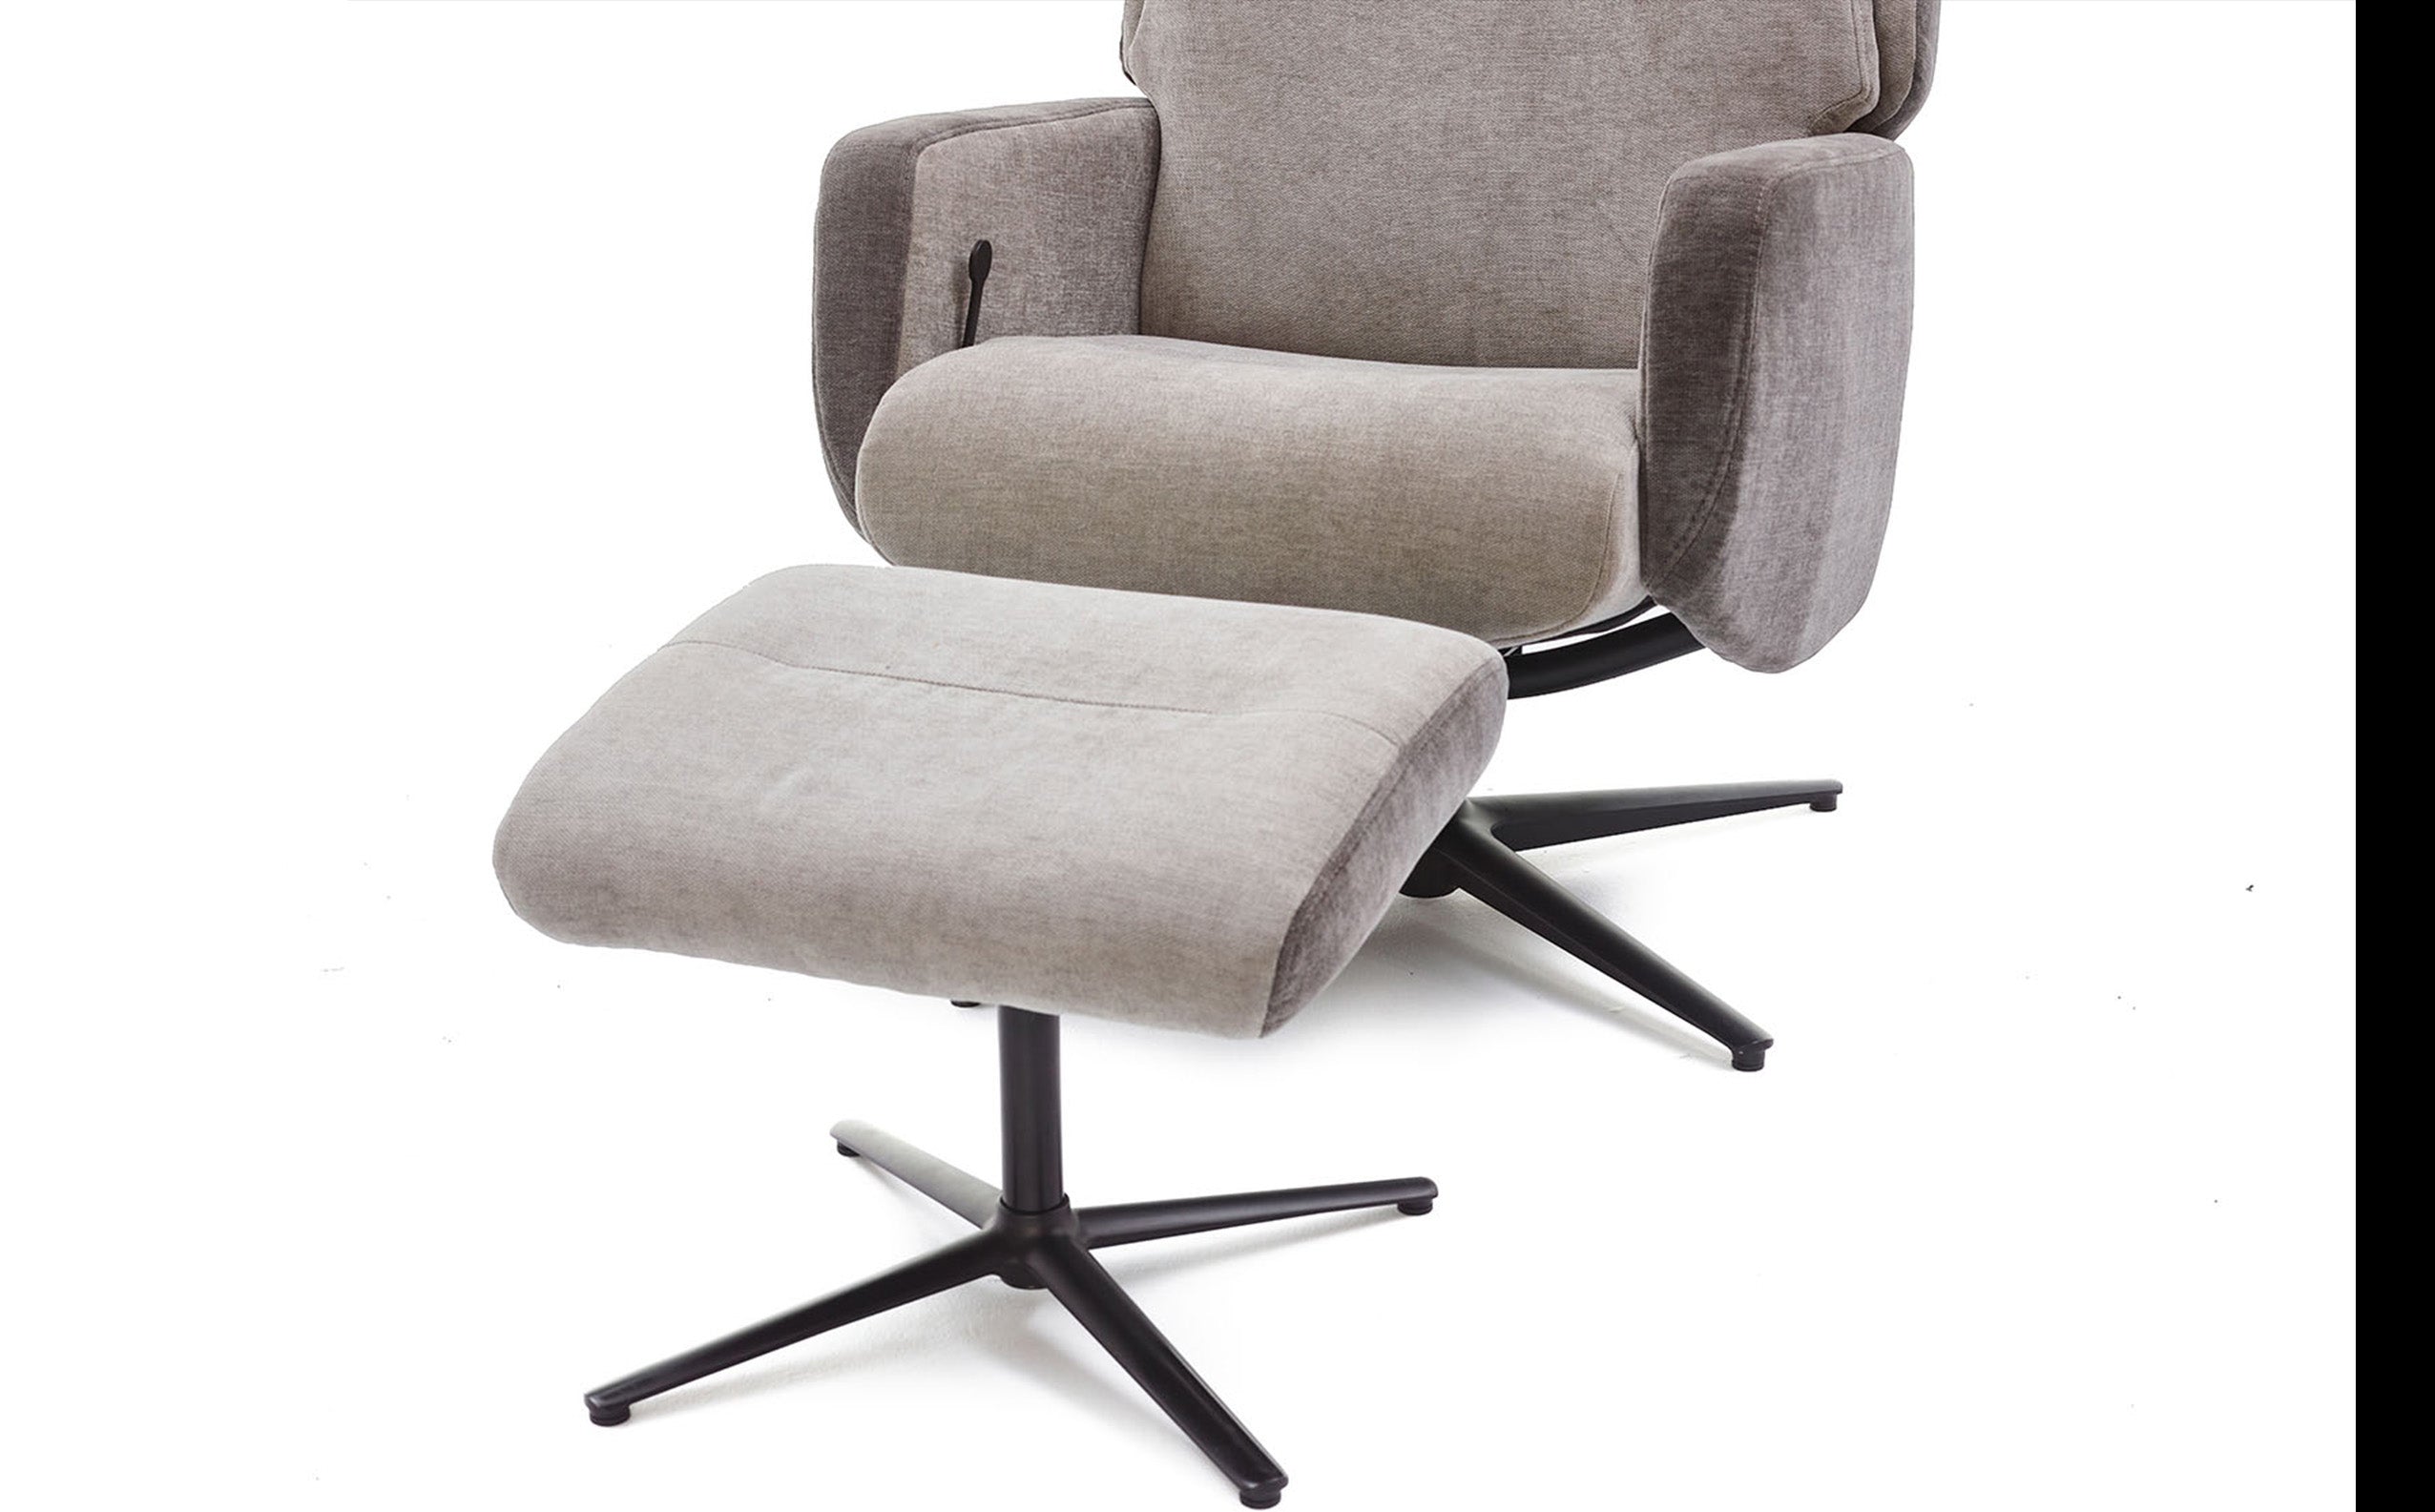 Parma relax chair